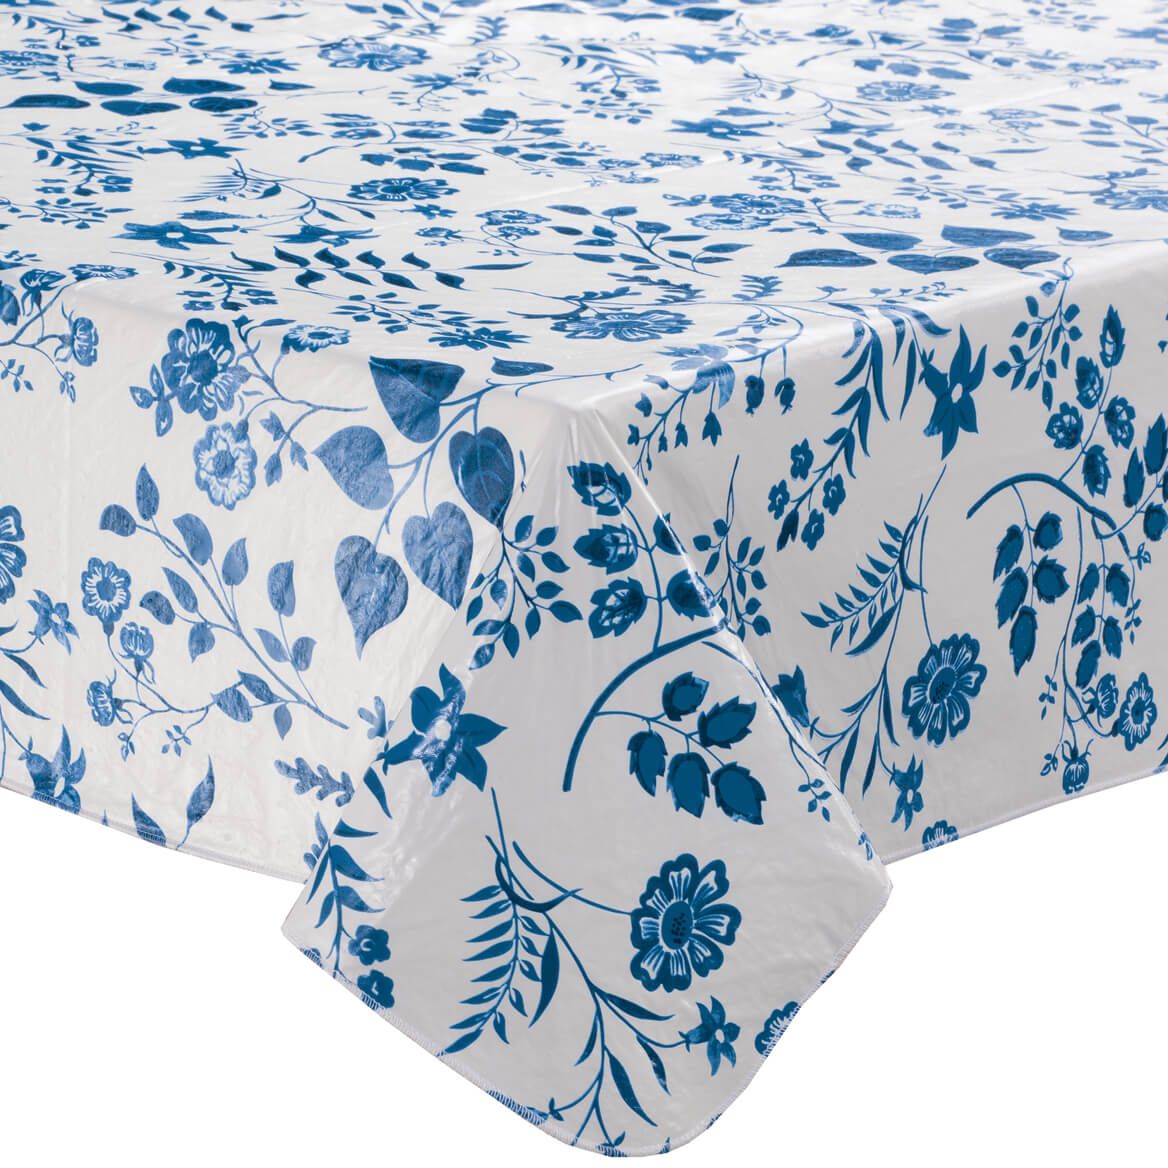 Flowing Flowers Vinyl Table Cover By Home-Style Kitchen™ + '-' + 355907